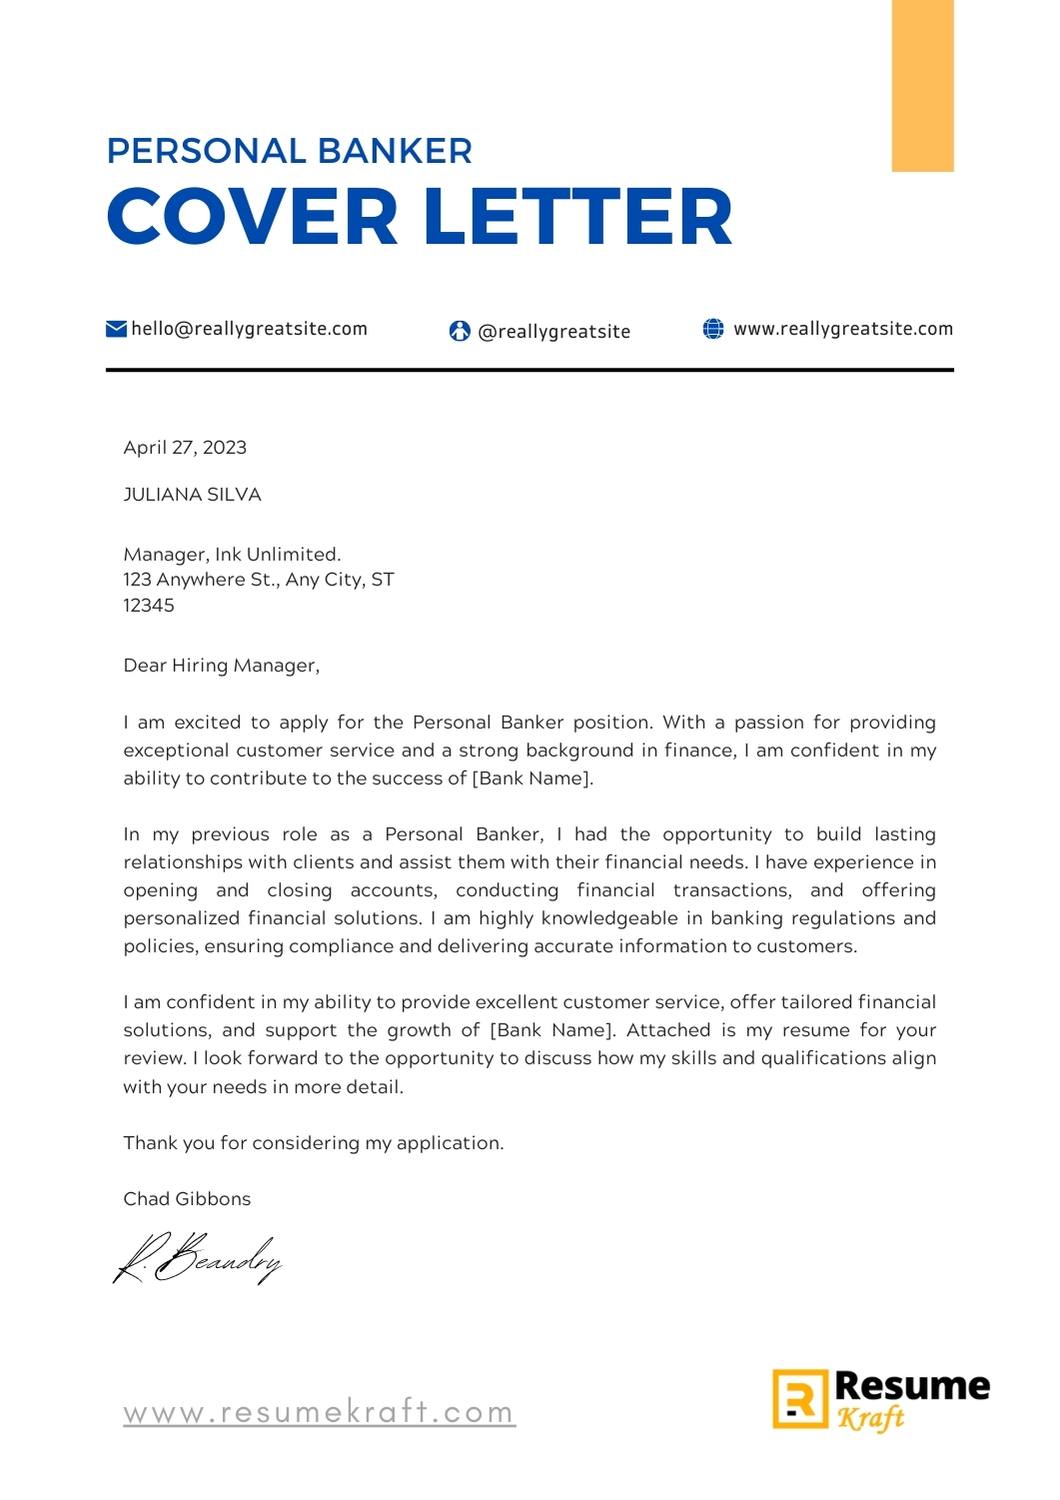 cover letter example for personal banker position